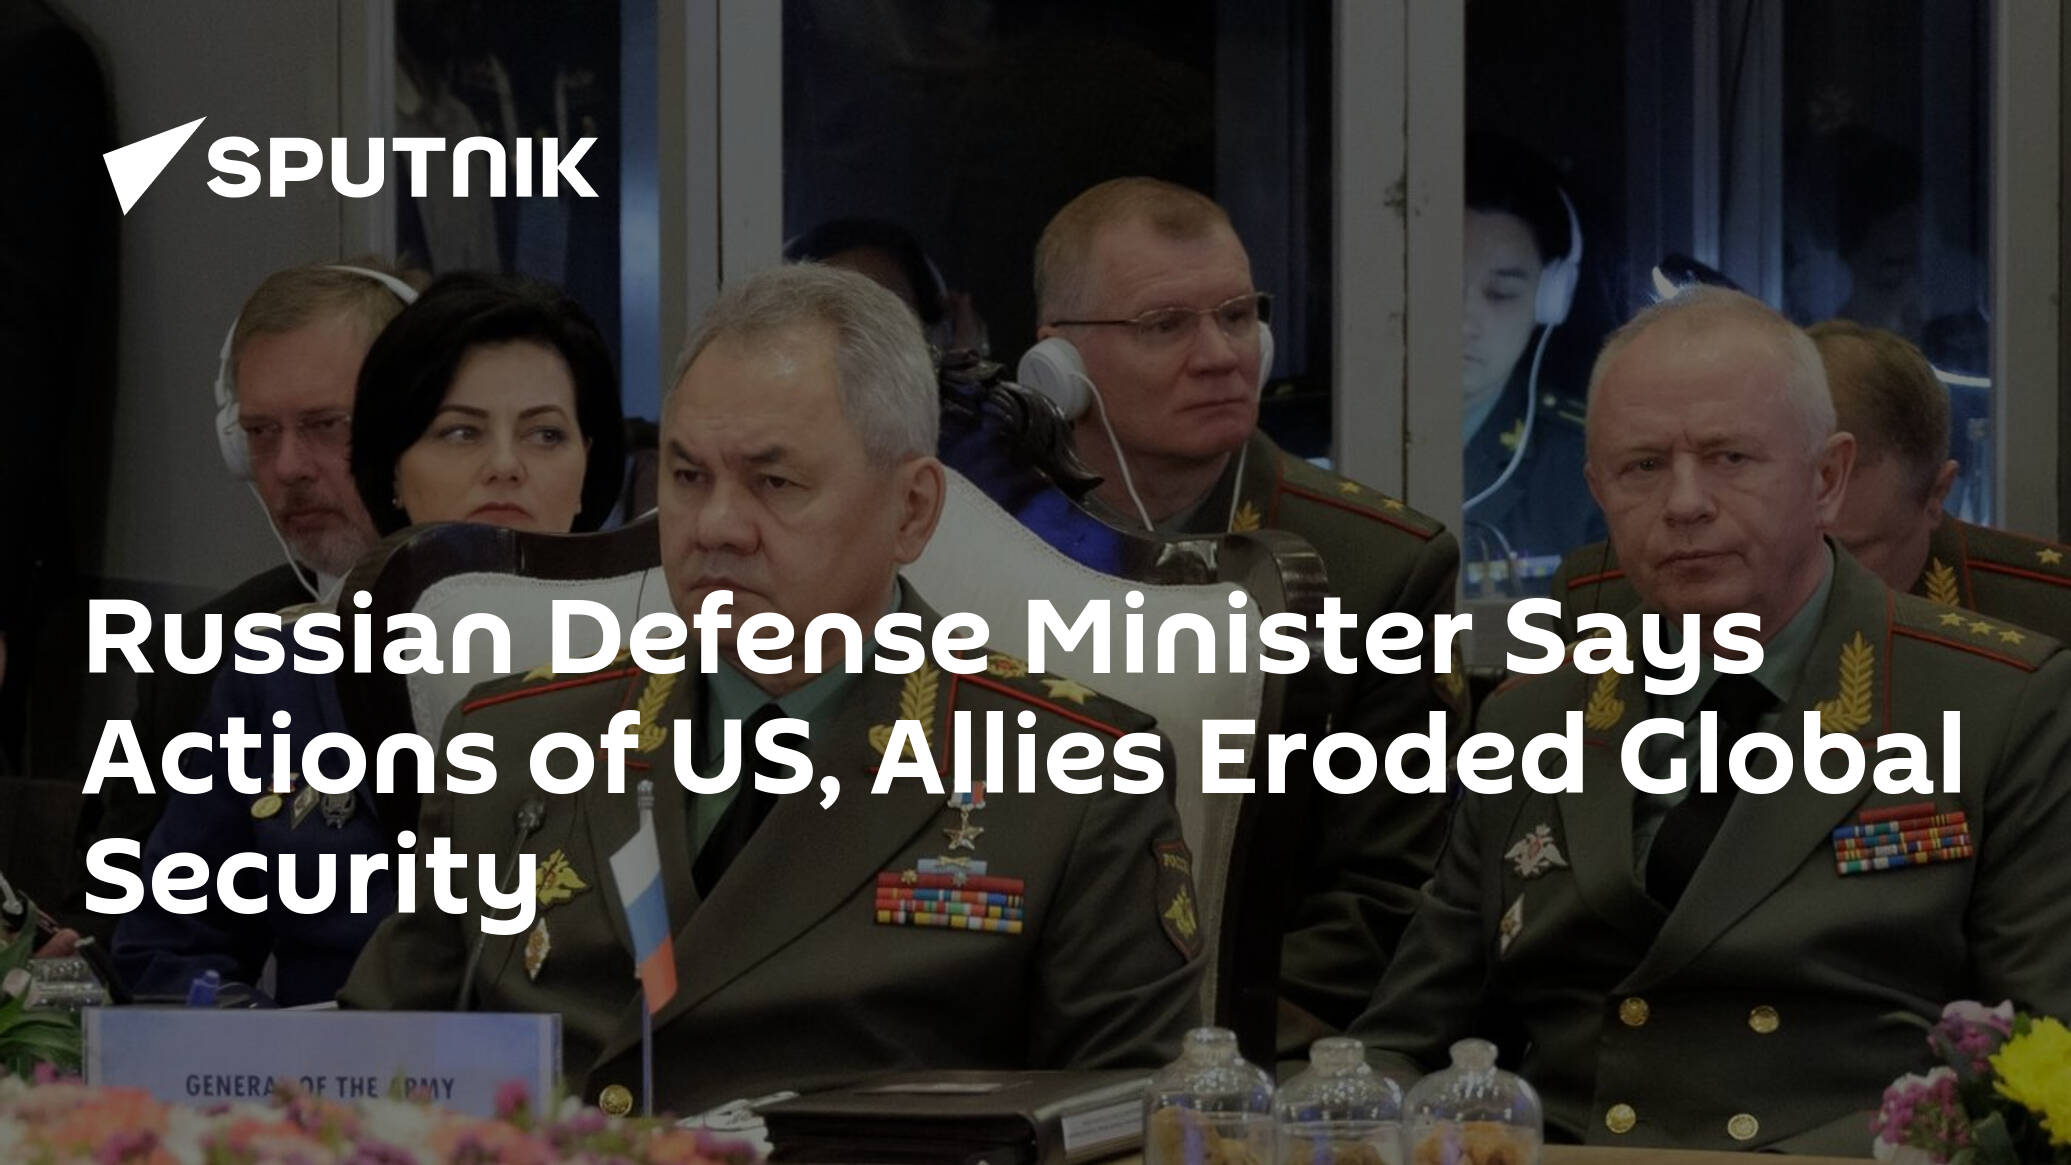 Russian Defense Minister Says Actions of US, Allies Eroded Global Security